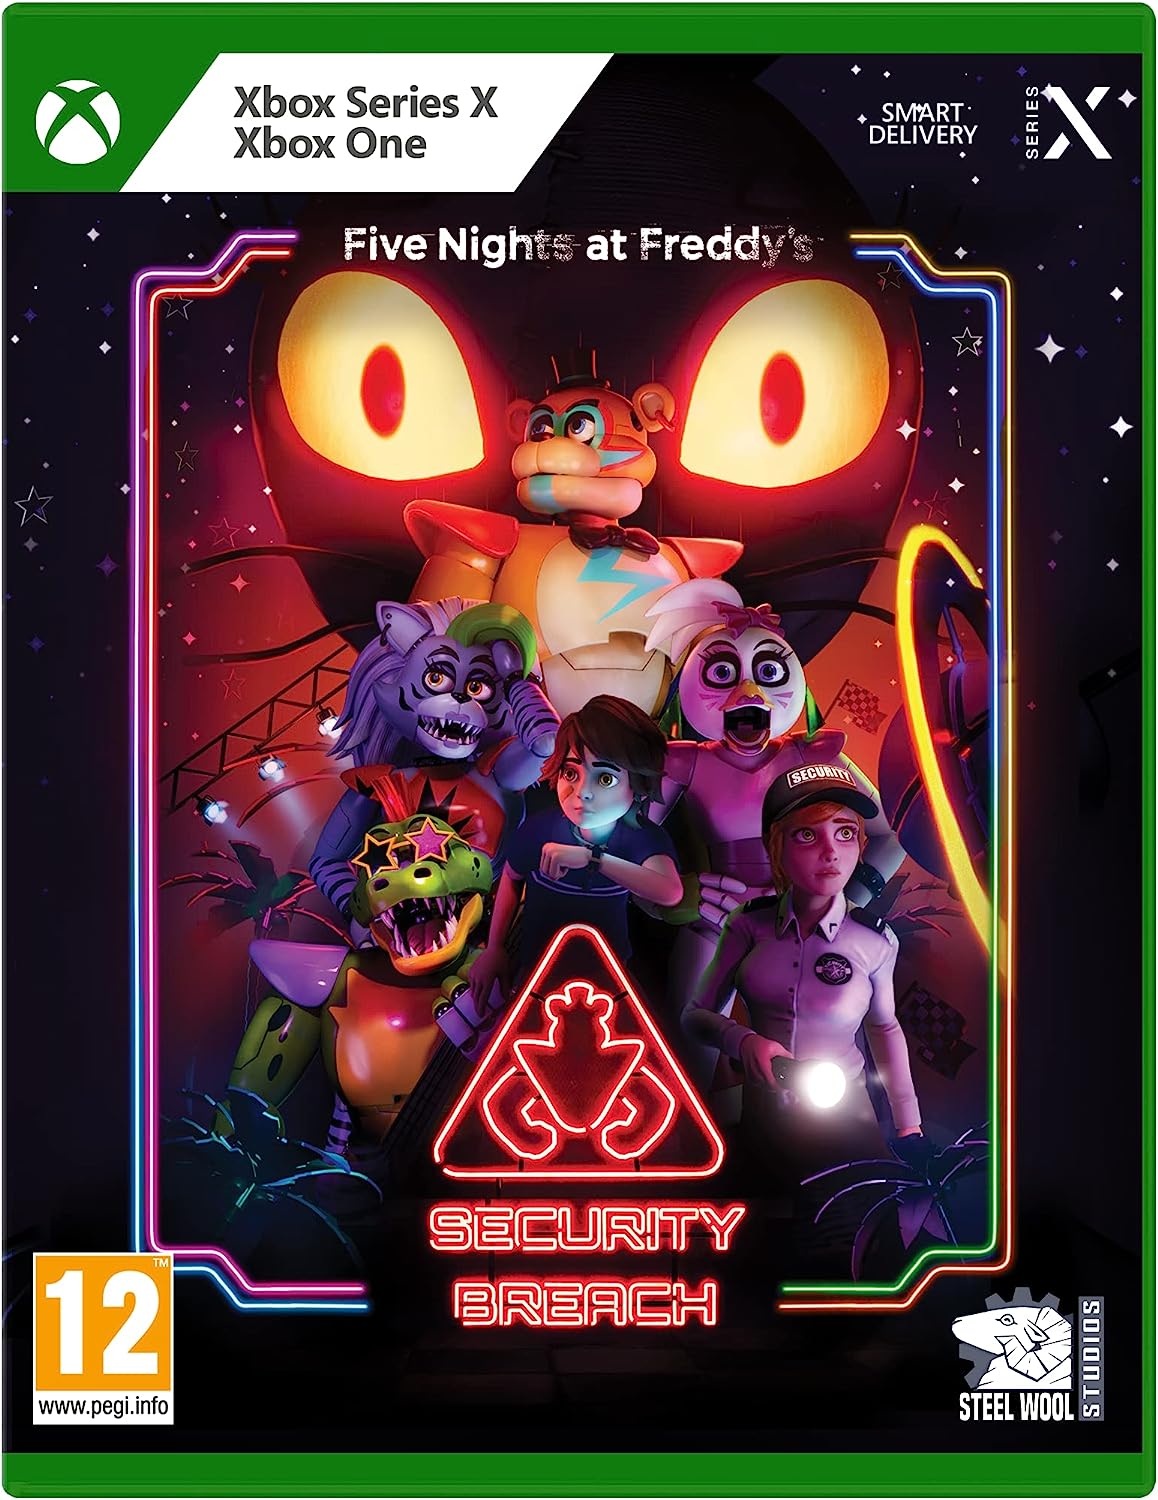 Five Nights at Freddy's: Help Wanted 2 Steam CD Key